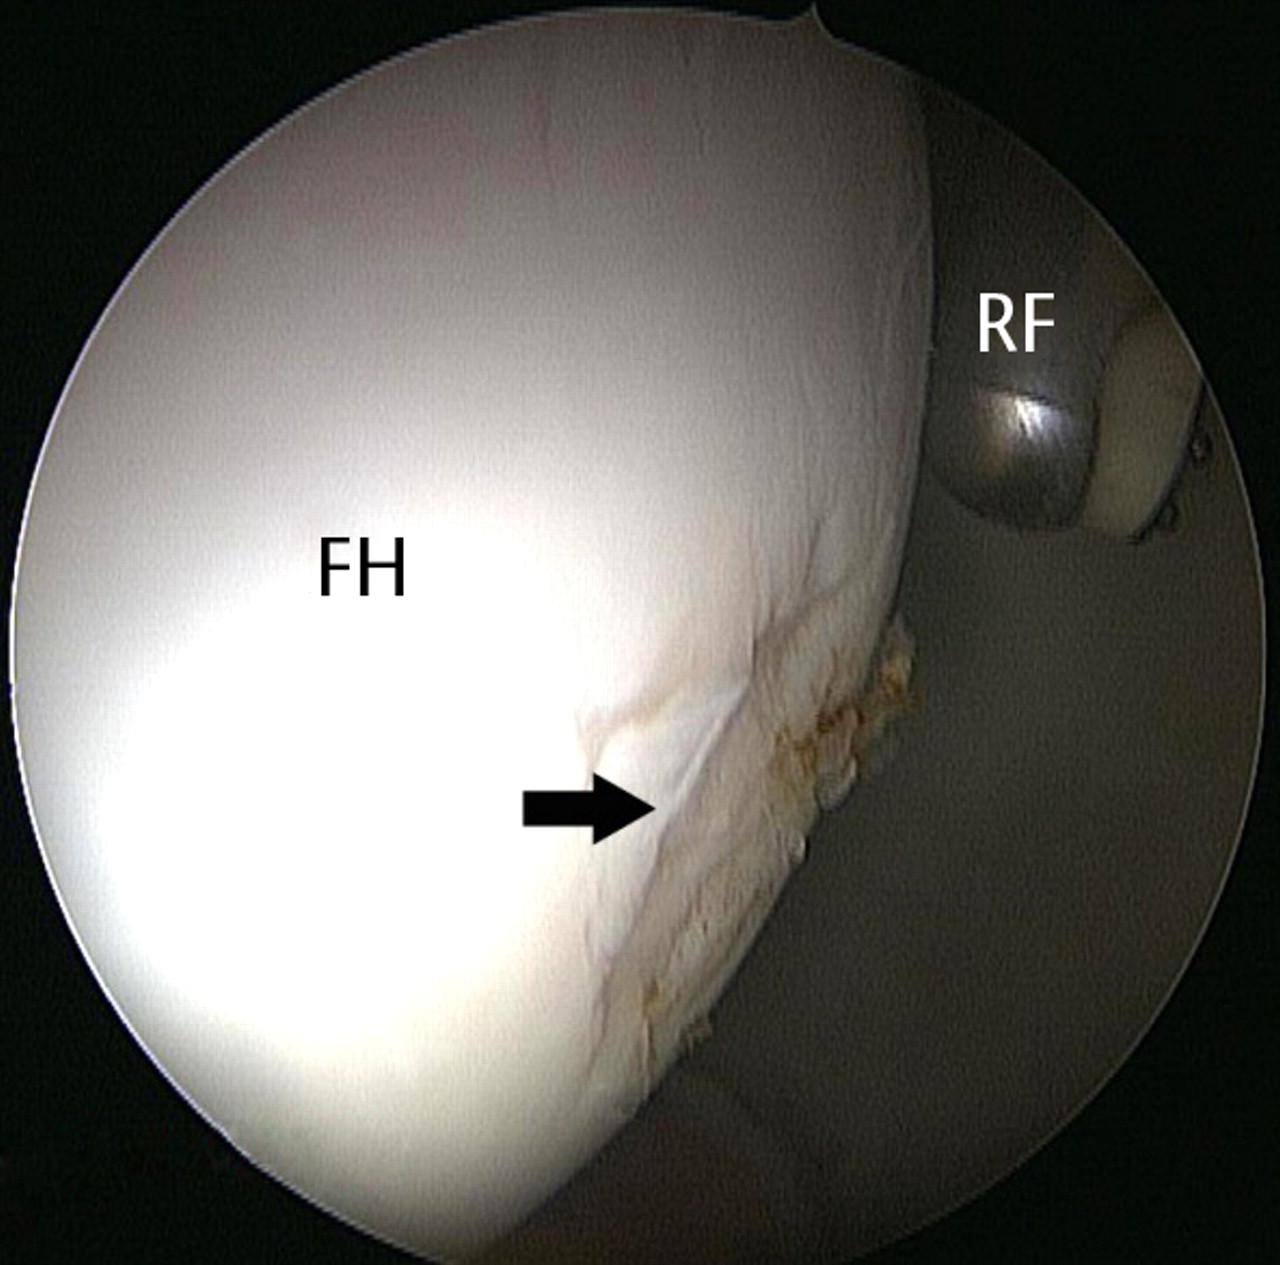 Fig. 3 
          Arthroscopic image showing iatrogenic
partial-thickness chondral scuffing (black arrow) of the femoral
head (FH) in a 40-year-old man undergoing labral repair with three
suture anchors. The radiofrequency ablation probe (RF) was used
to smooth the scuffed area of the femoral head.
        